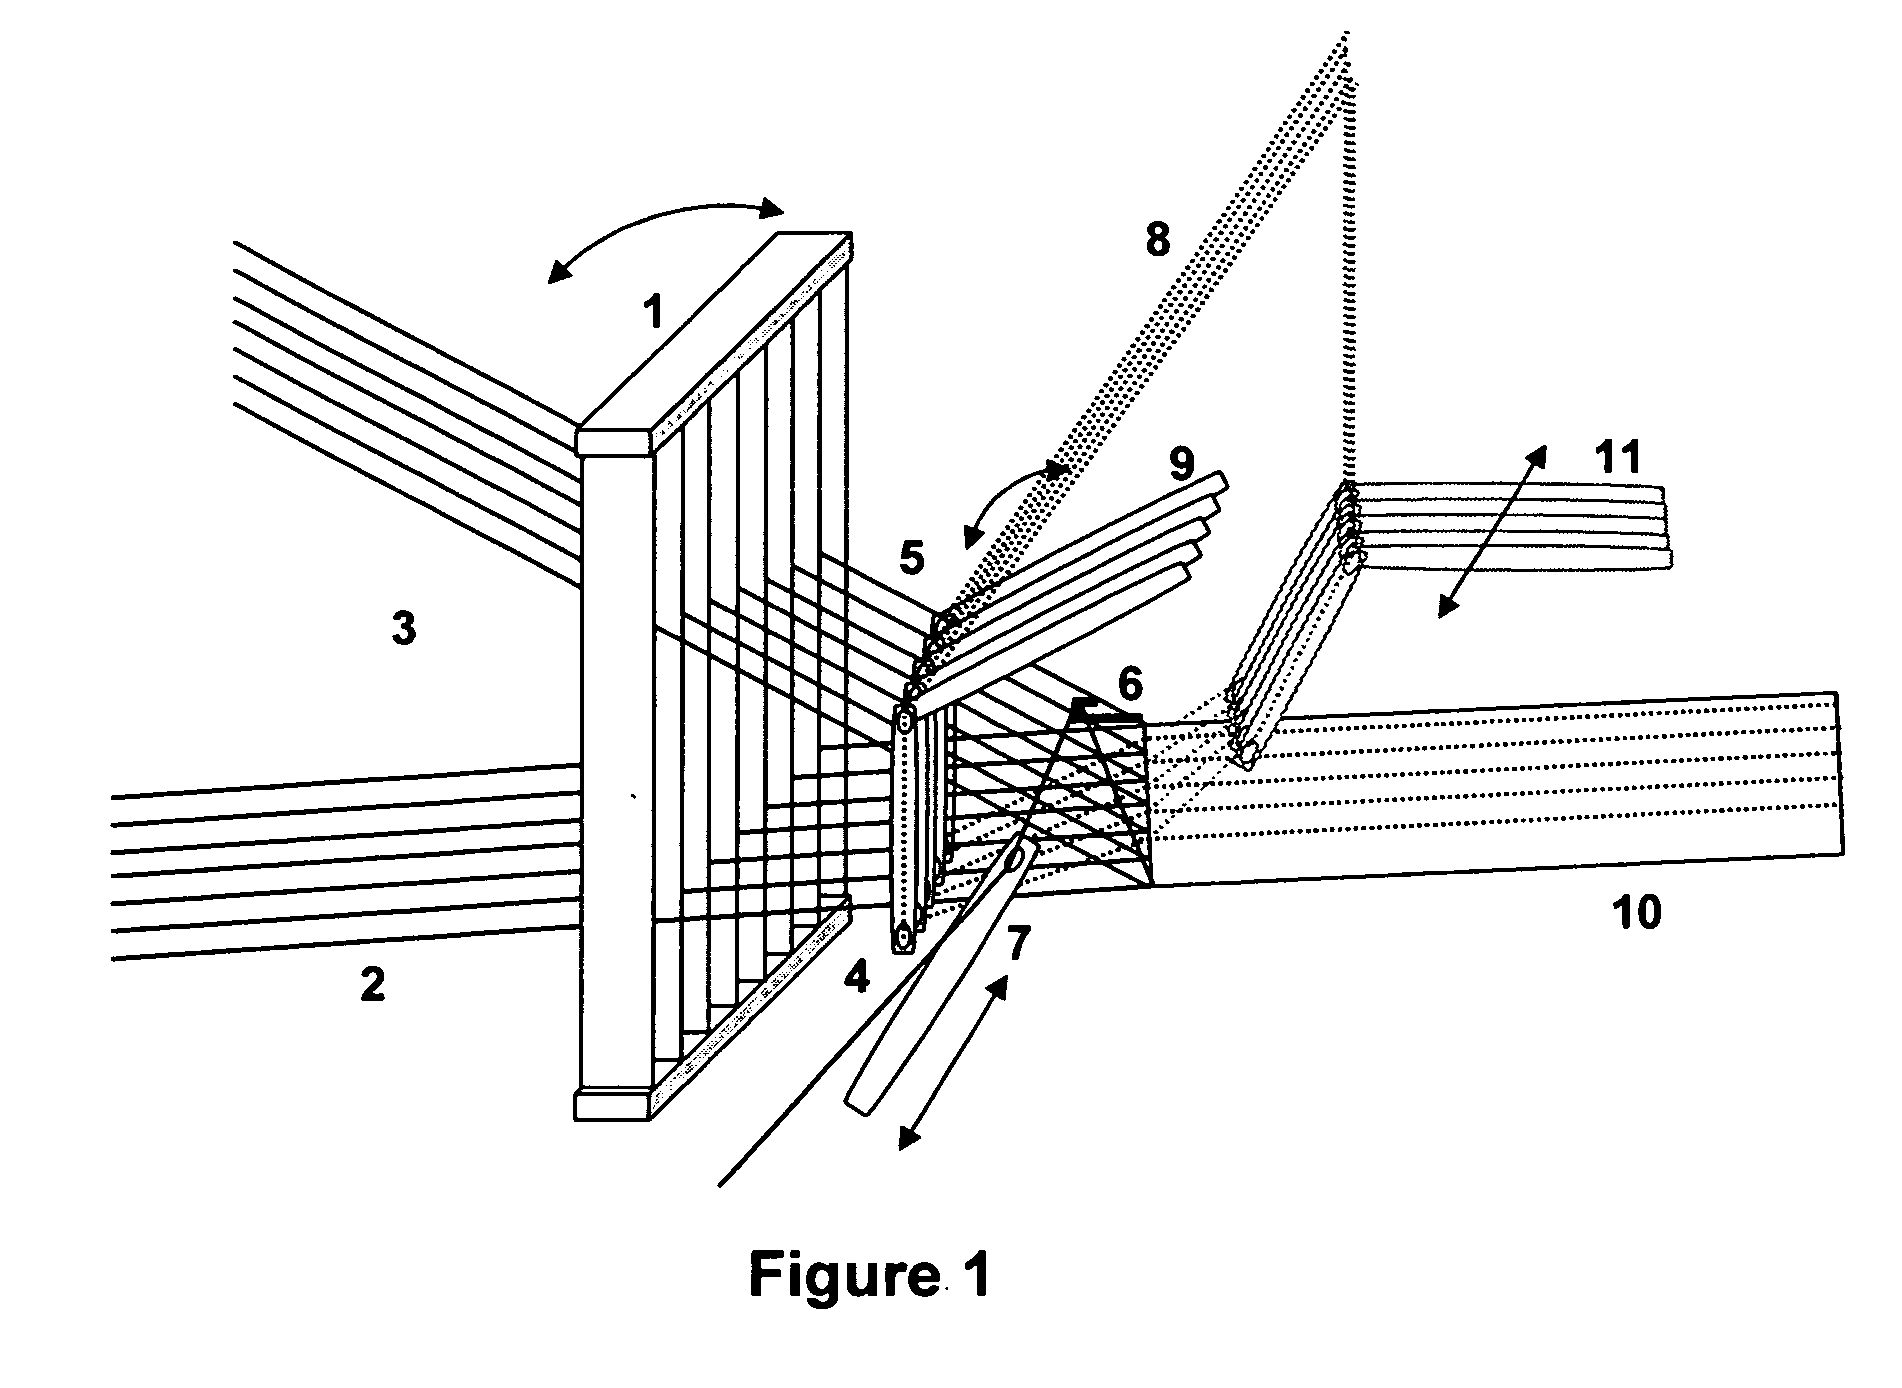 Loom for producing woven goods or material with an incorporated cover thread